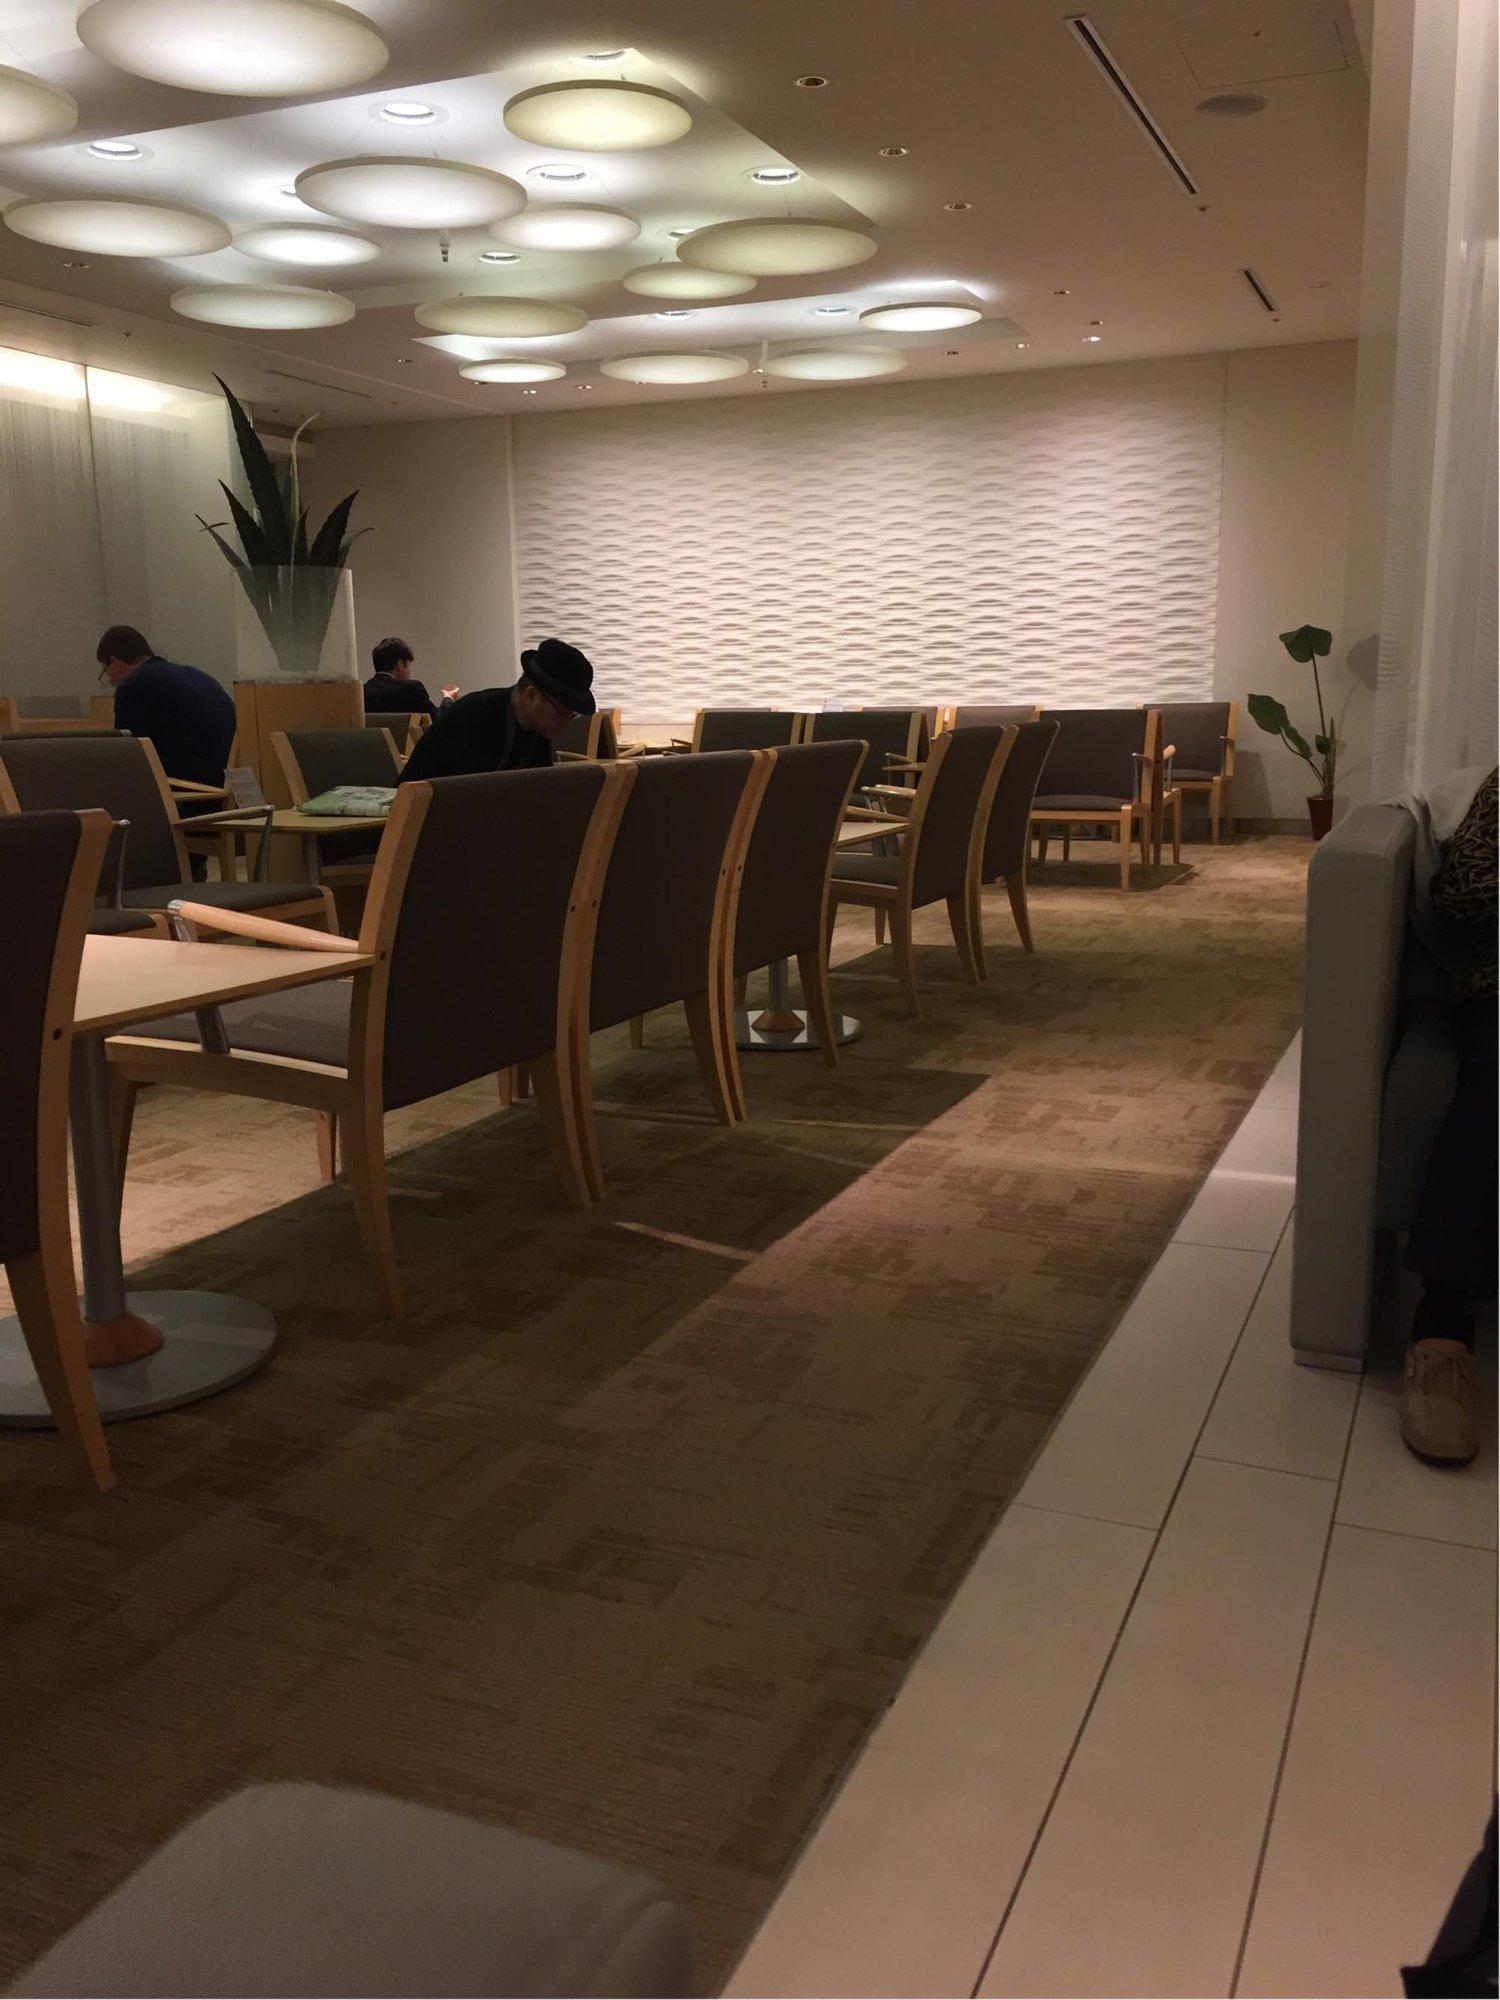 All Nippon Airways ANA Arrival Lounge image 10 of 11